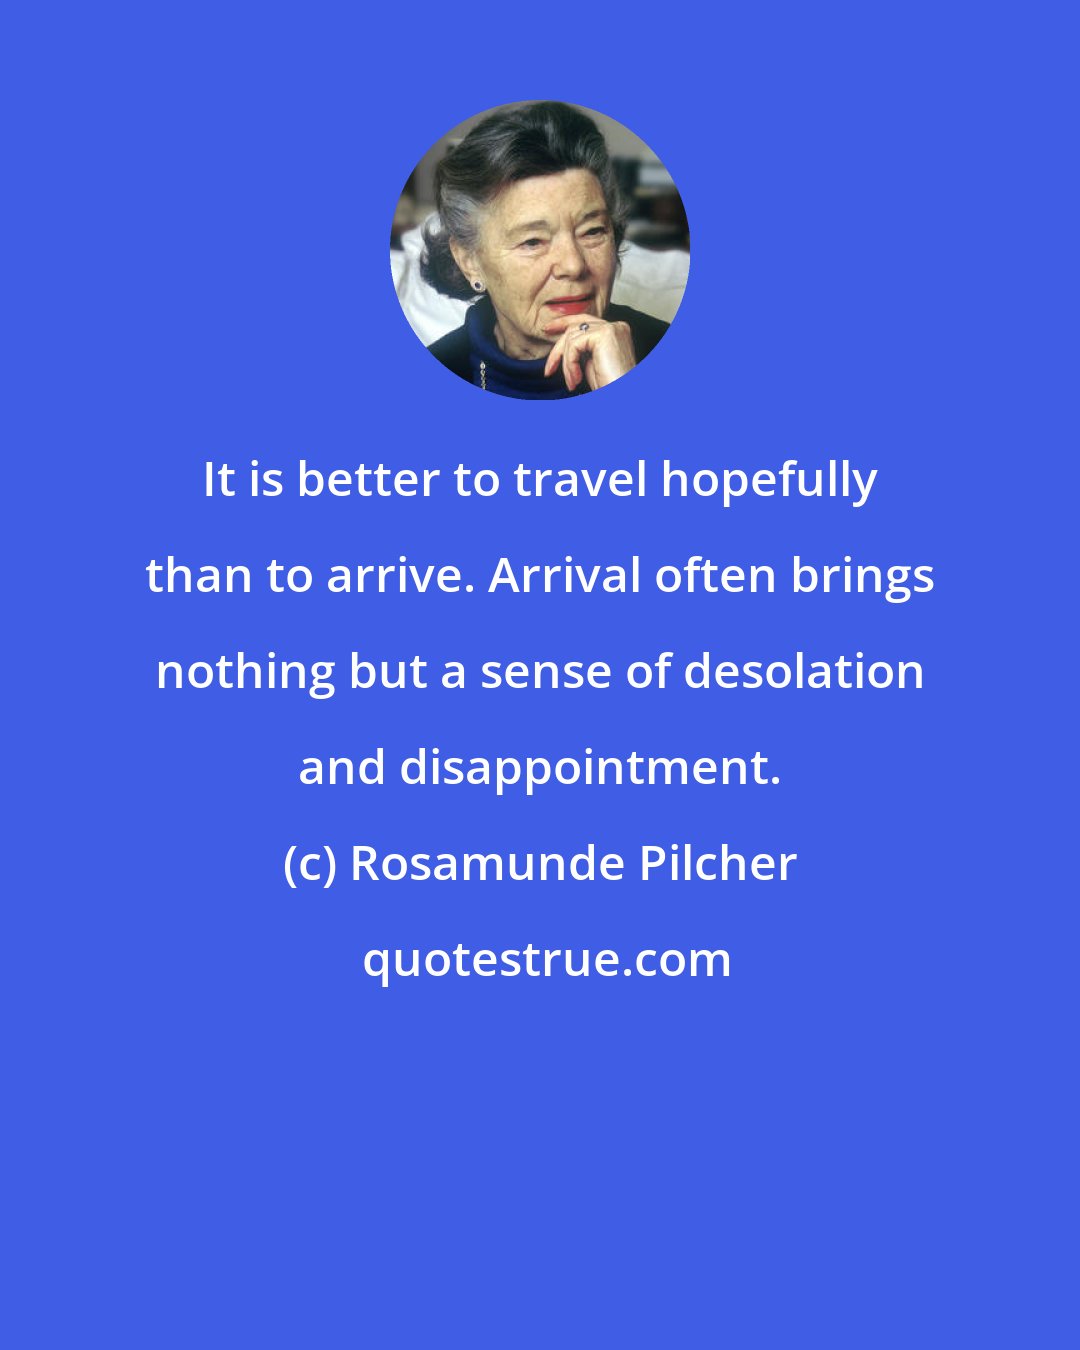 Rosamunde Pilcher: It is better to travel hopefully than to arrive. Arrival often brings nothing but a sense of desolation and disappointment.